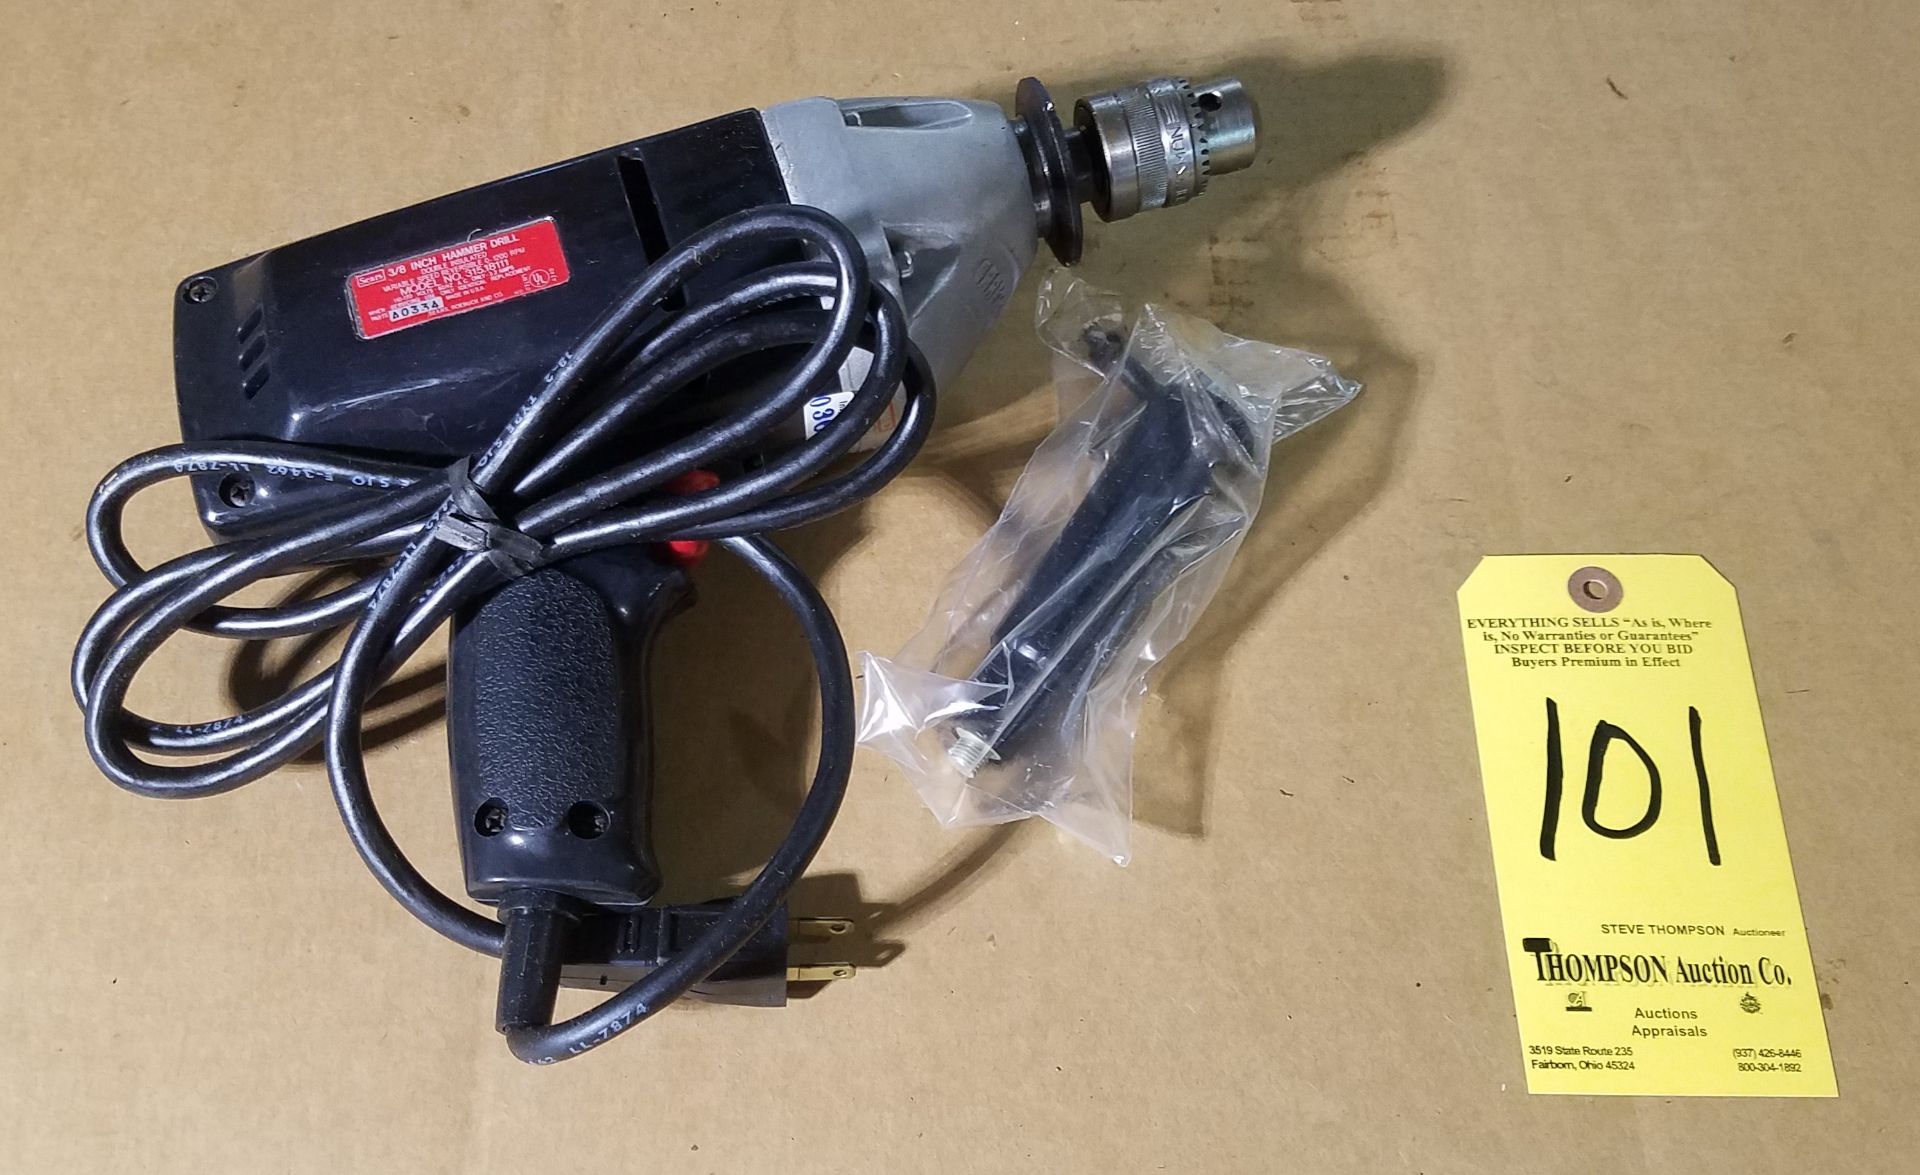 Sears 3/8 Inch Variable Speed Hammer Drill